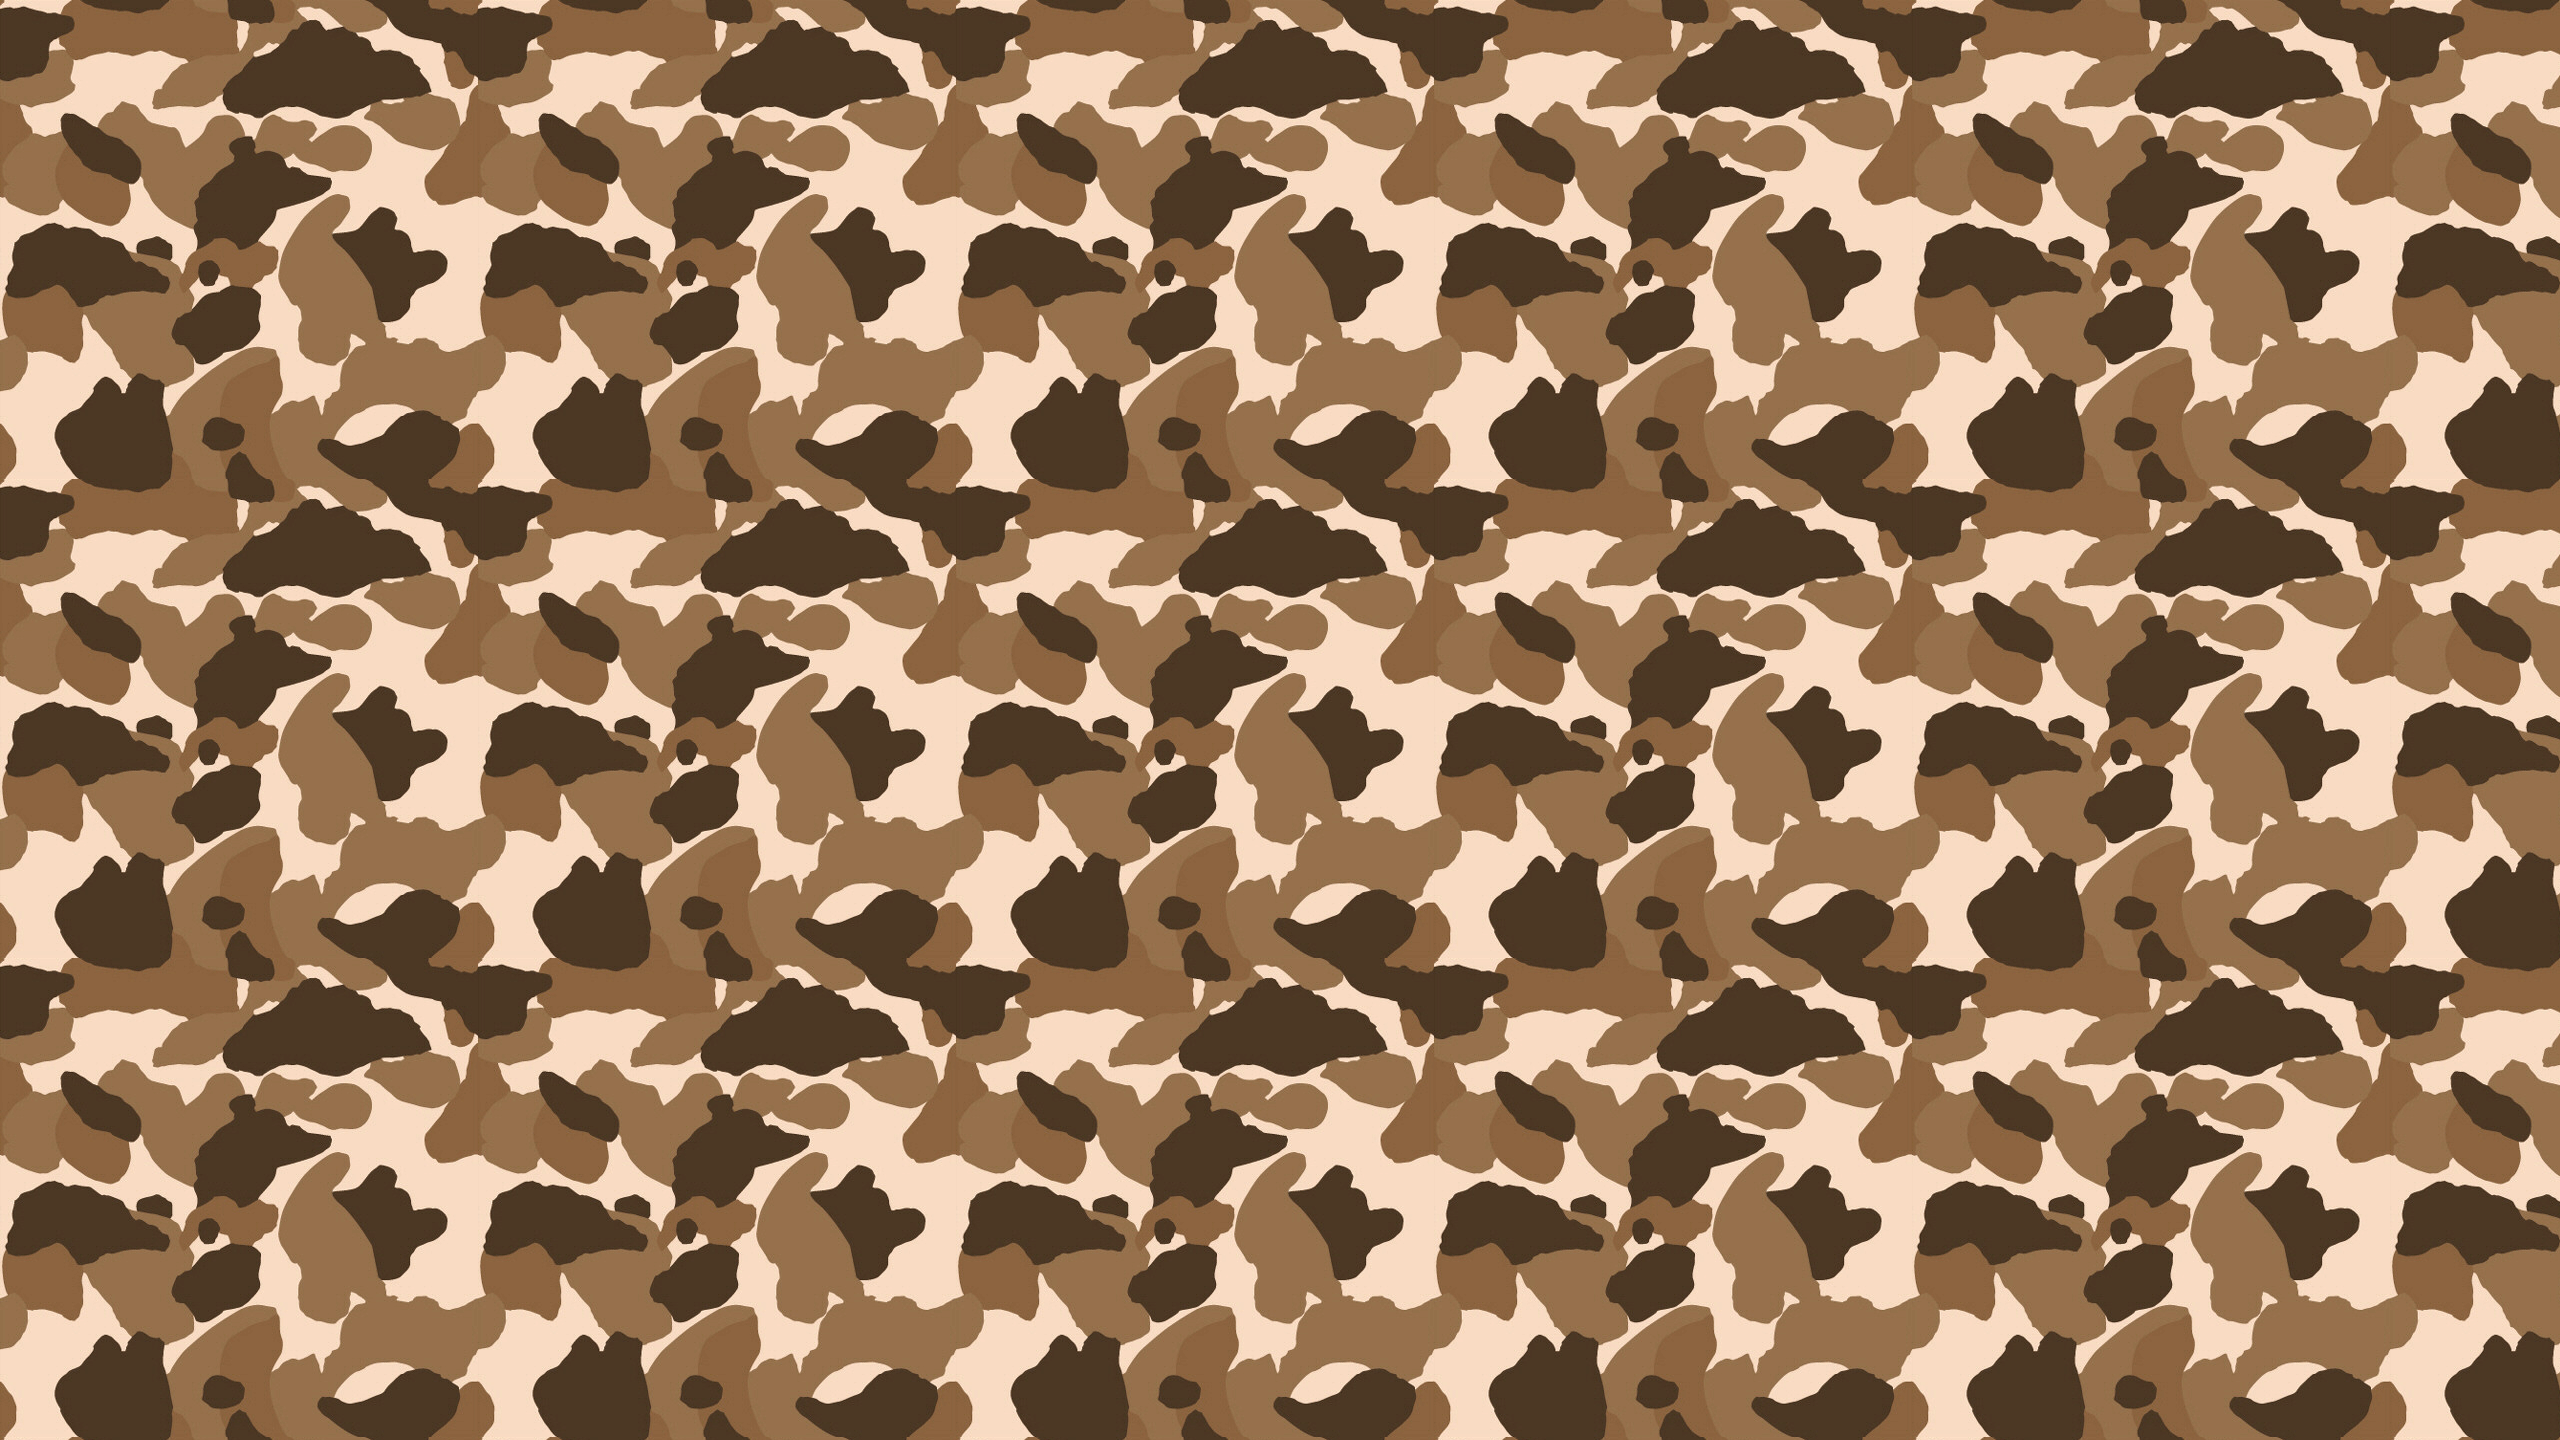 This Brown Camo Desktop Wallpaper Is Easy Just Save The